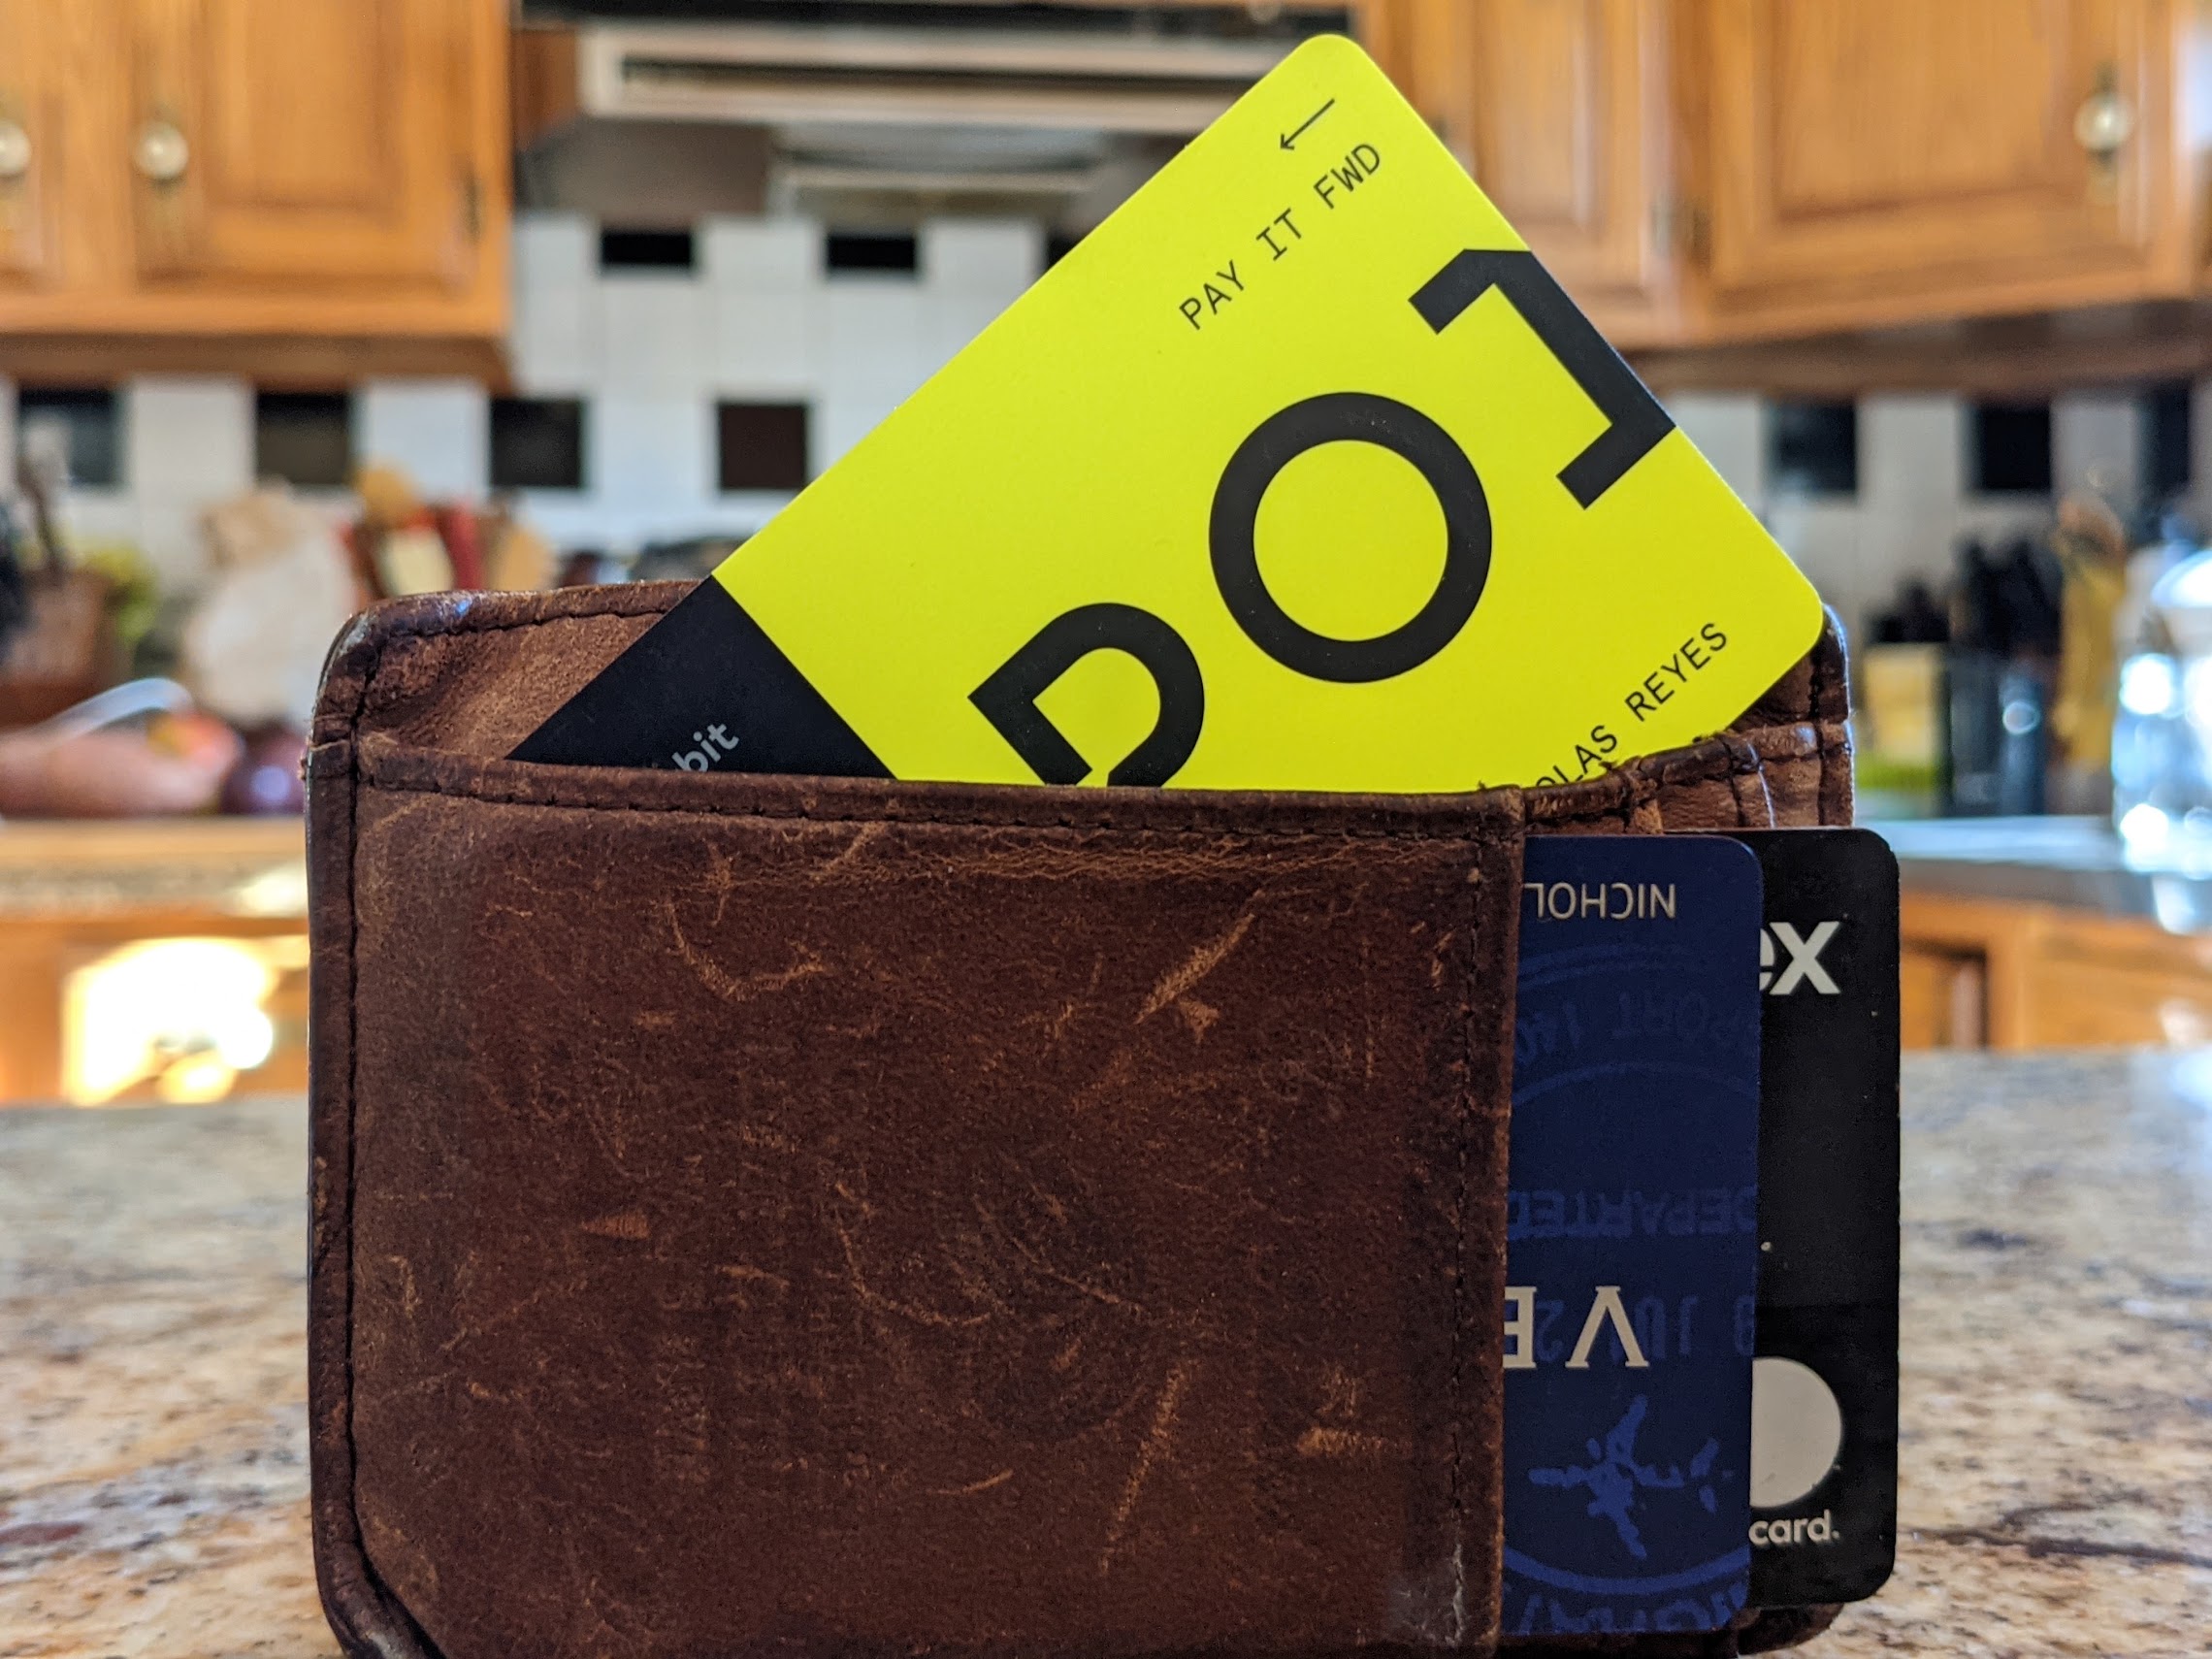 a wallet with a yellow card inside